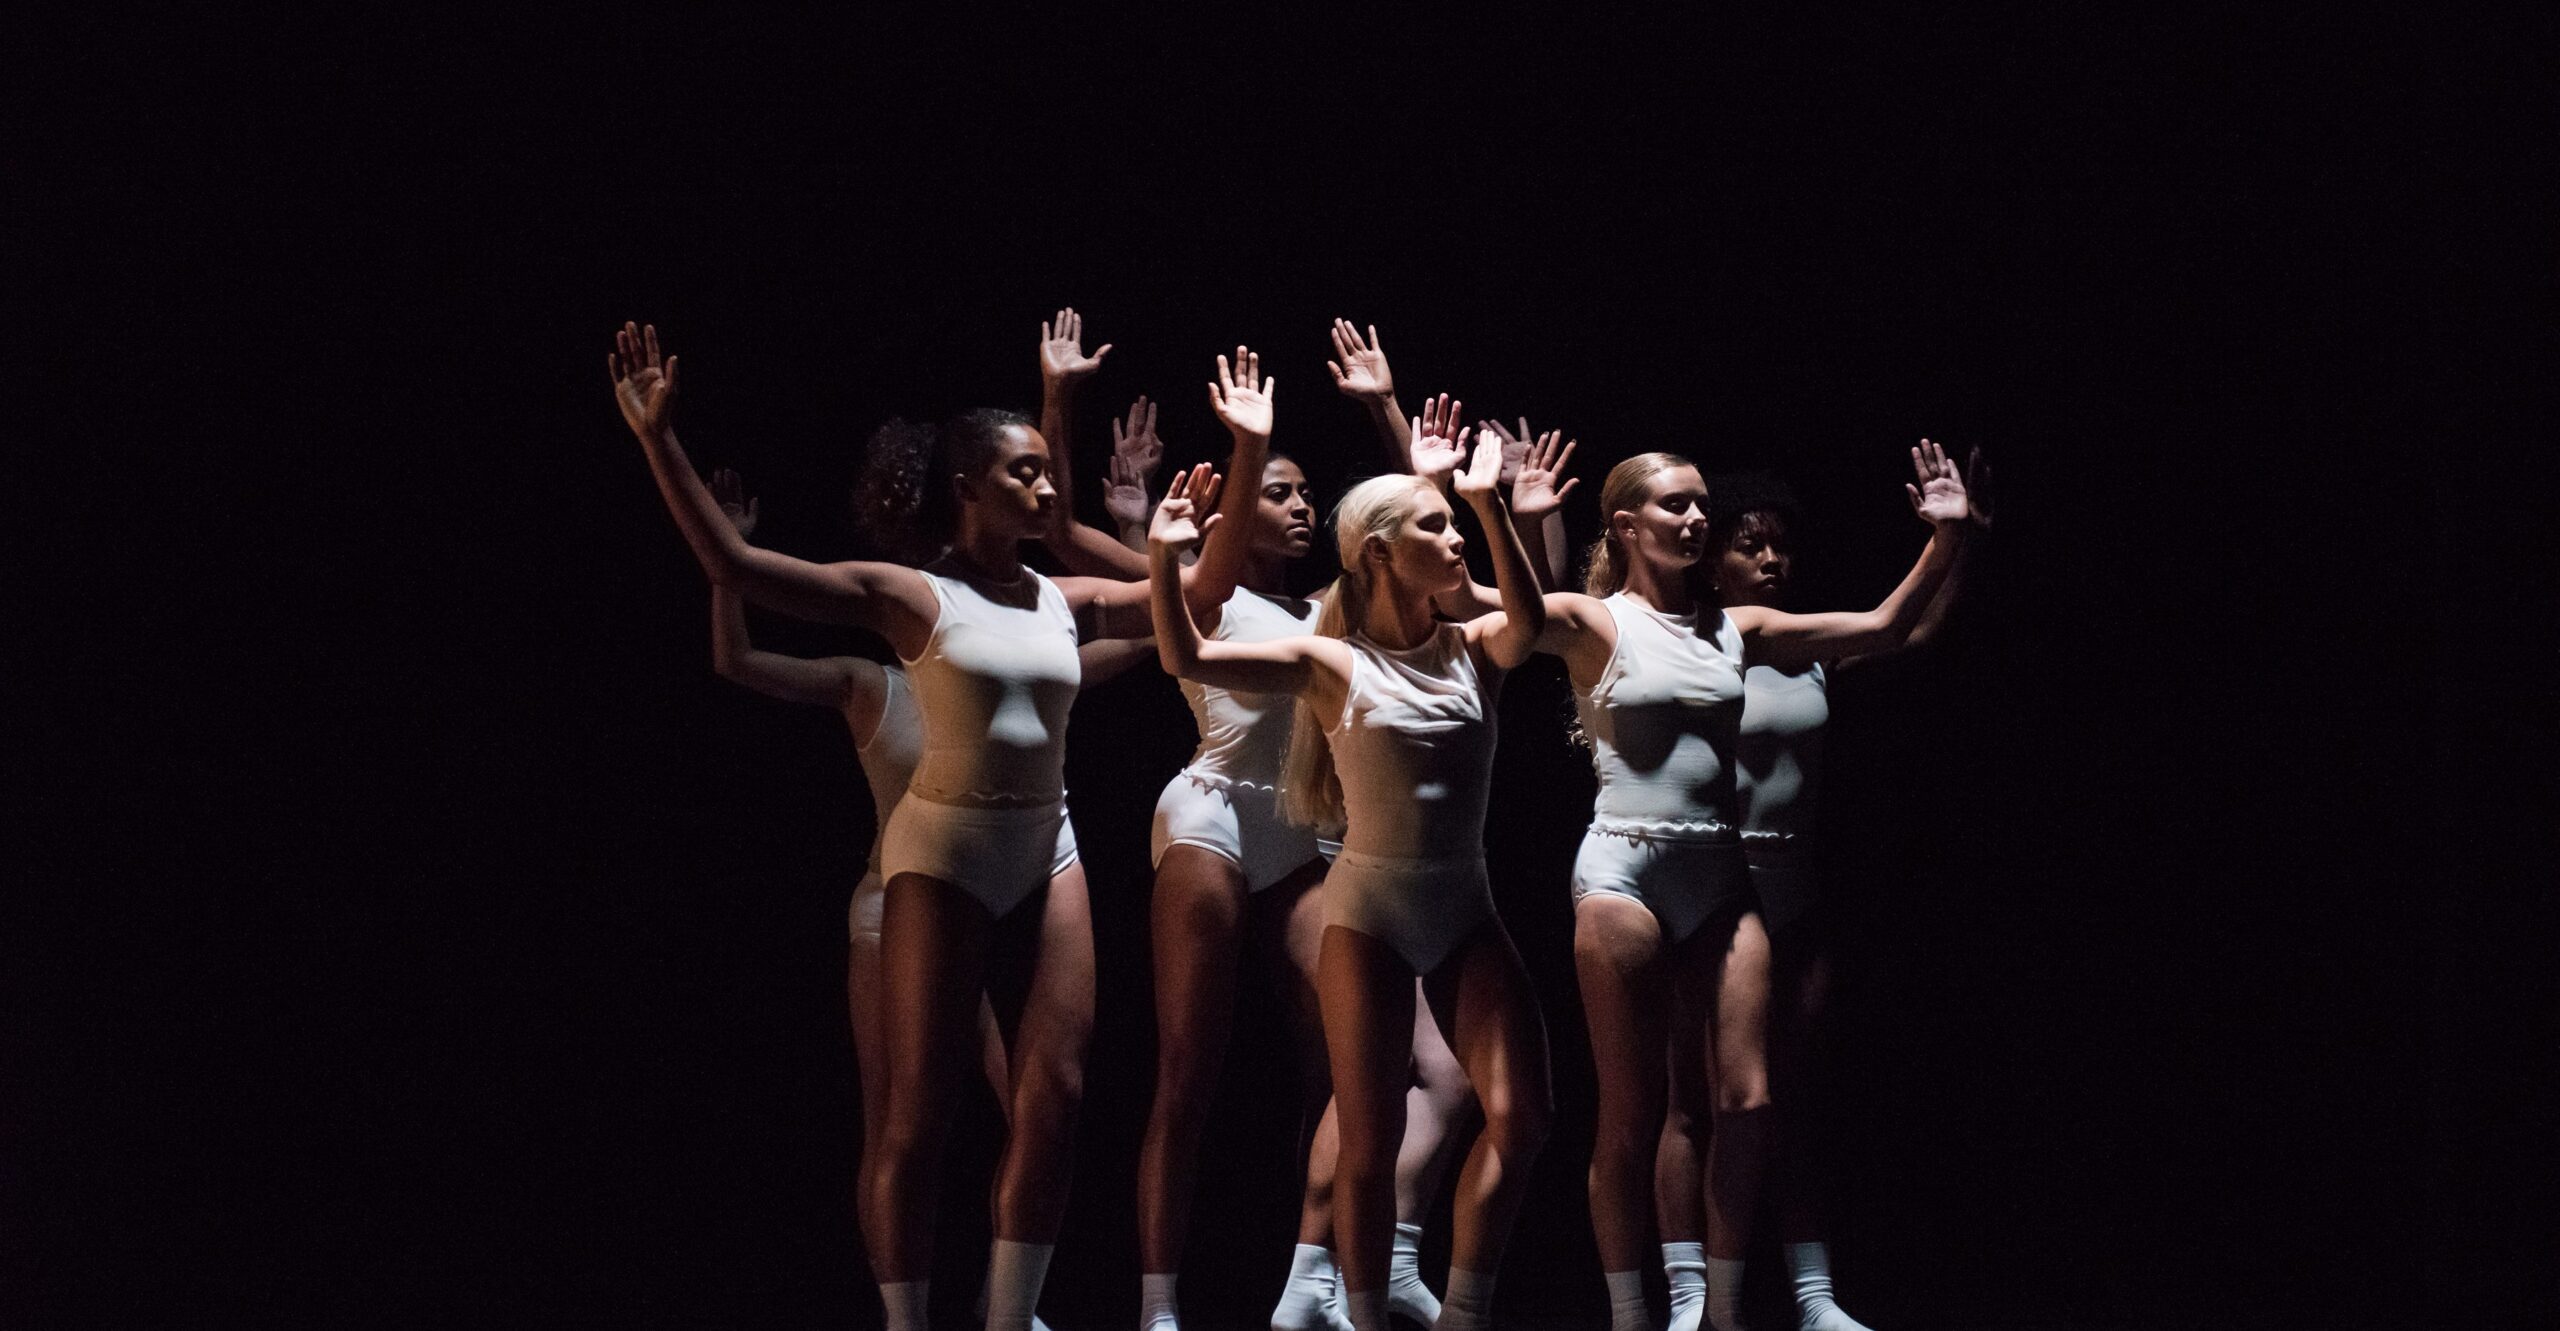 A group of women dancers performs, clustered together with arms in the air, with simple, white costumes and black background.